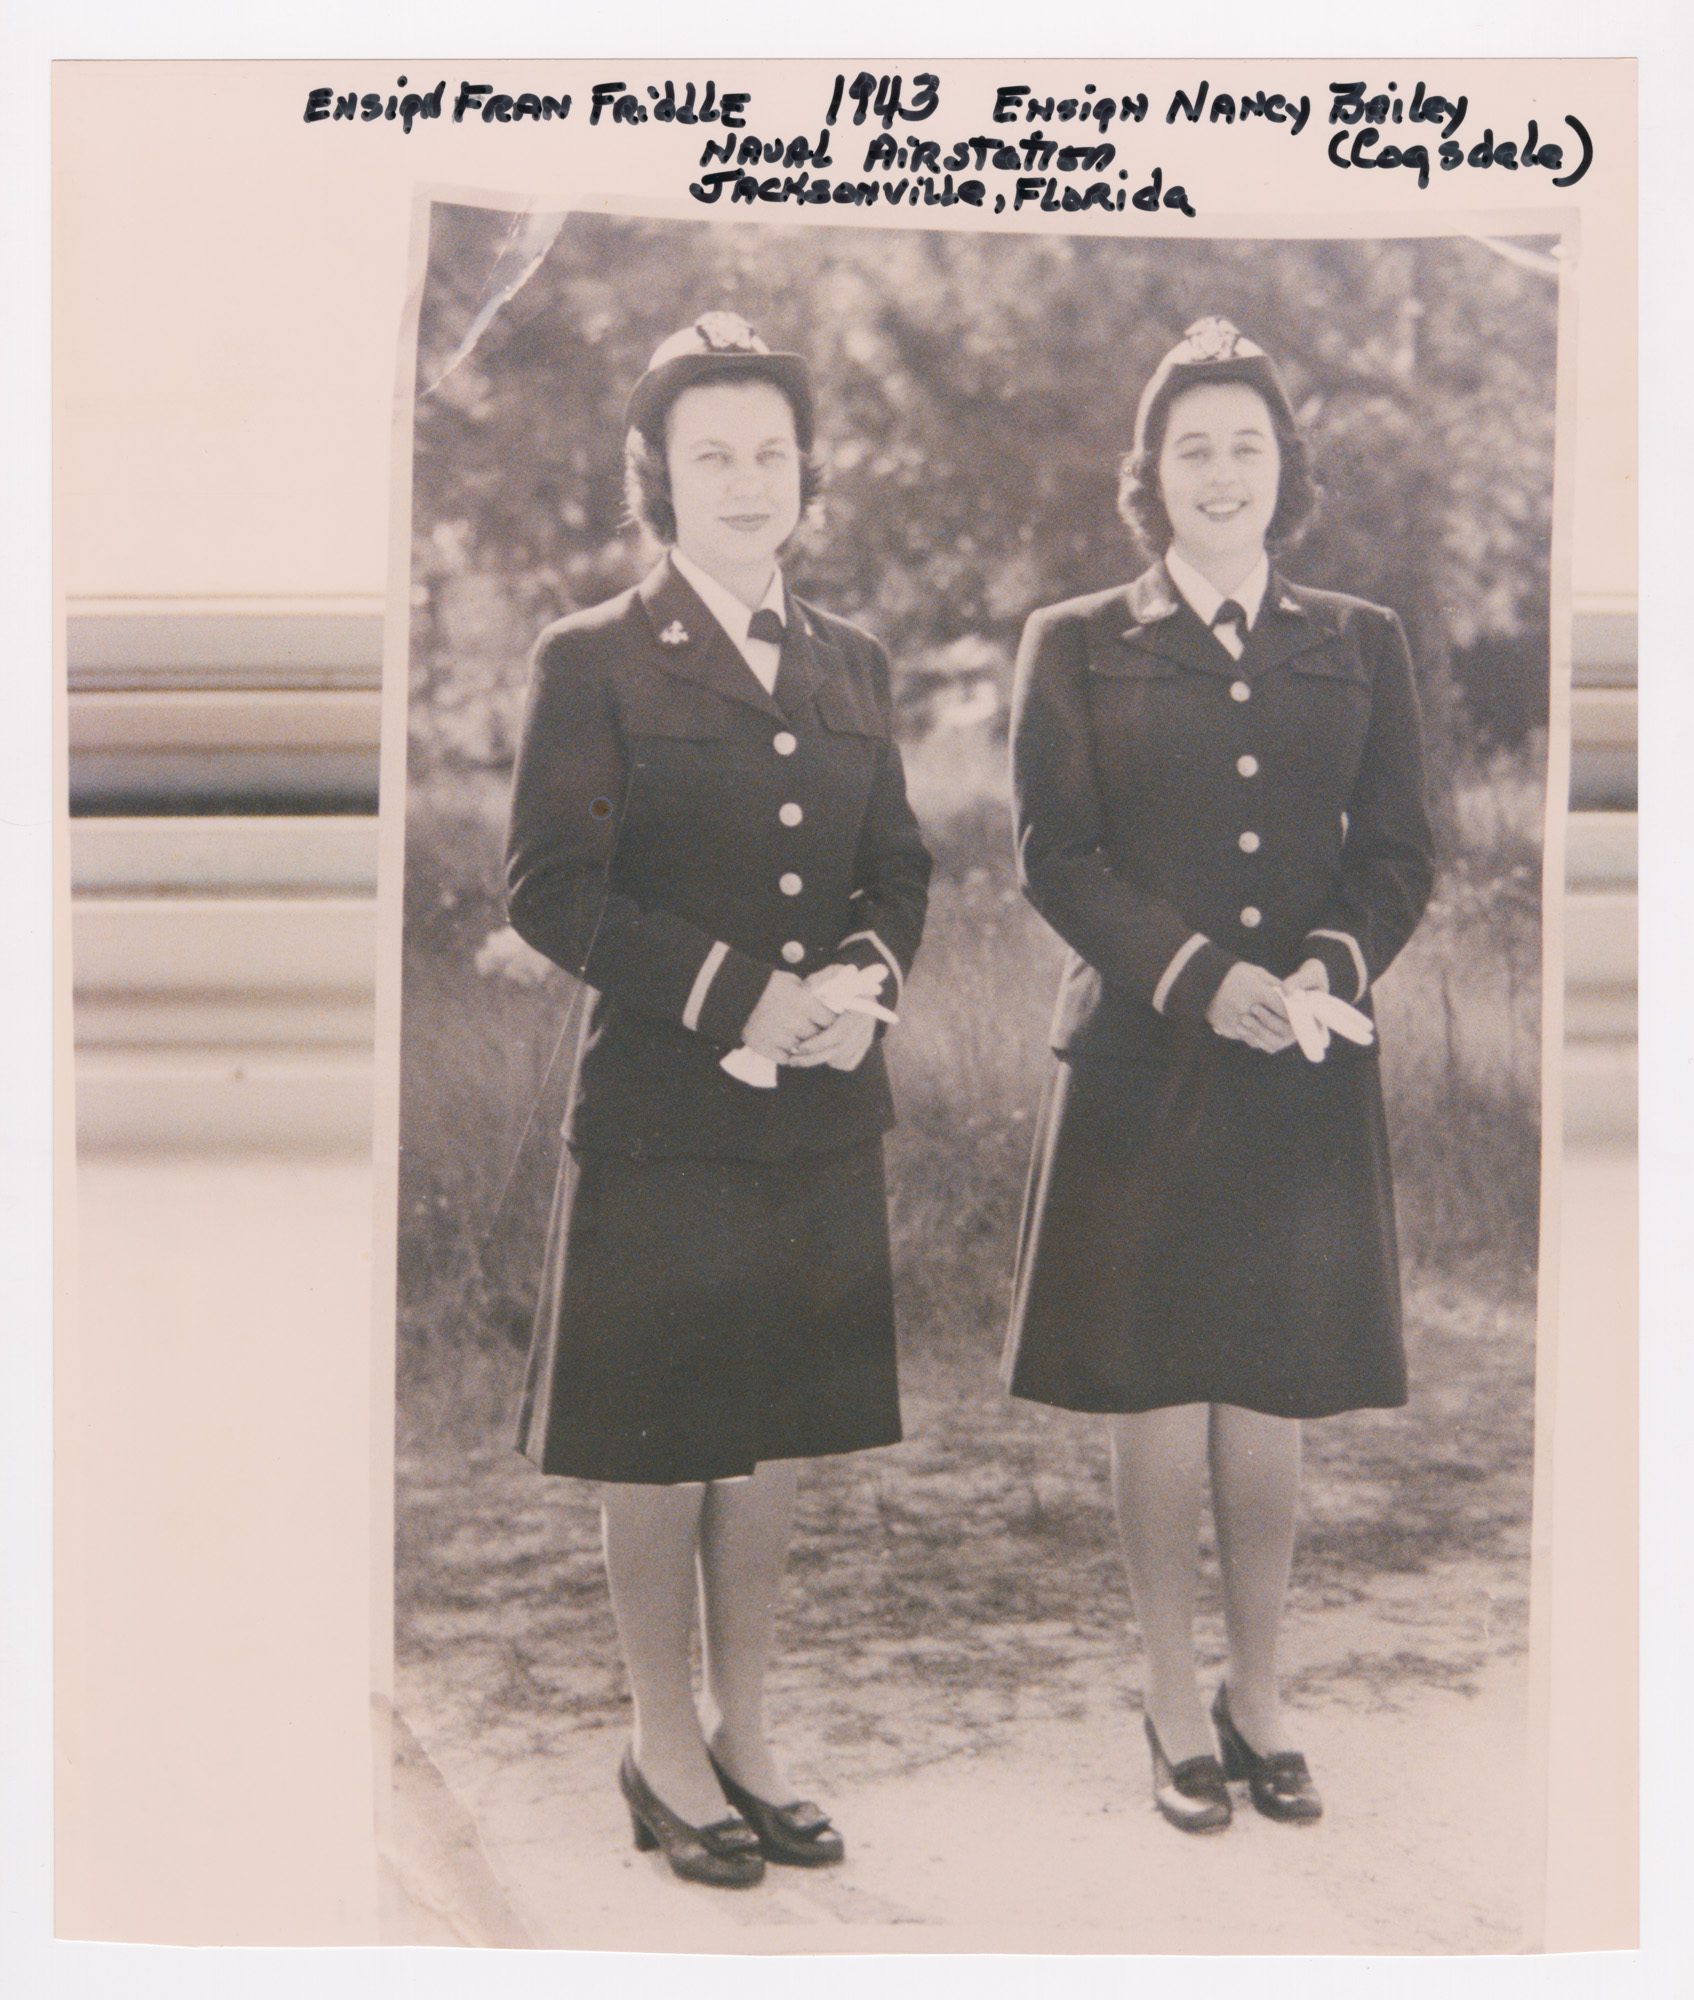 Ensigns Fran Friddle and Nancy Bailey Bon Cogsdale in winter WAVE uniforms at Naval Air Station, Jacksonville, Florida in 1943. (VMHC 1996.86.1. Gift of Nancy Bailey Bon Cogsdale) 